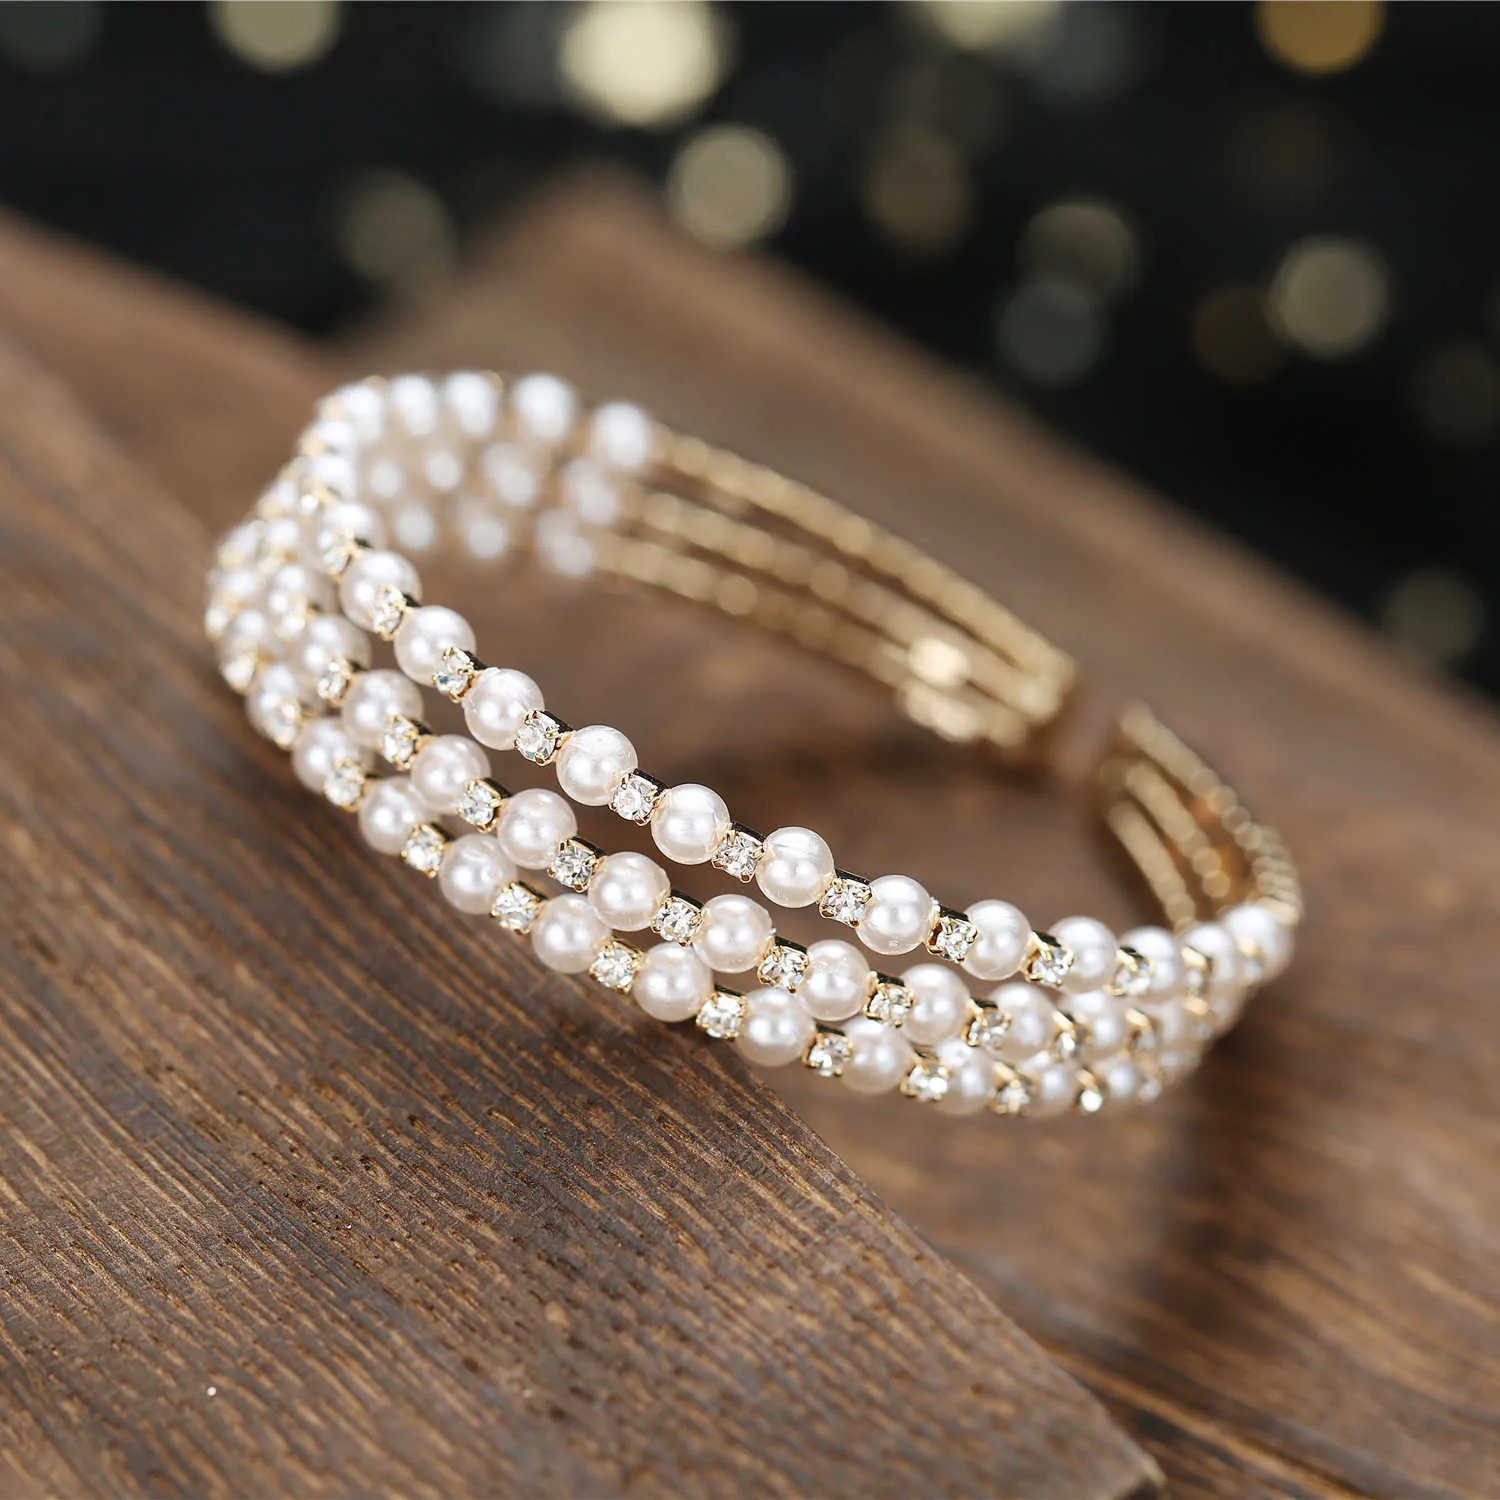 2021 Open Cuff Three Rows Pearl Bracelet Rhinestone Inlaid Adjustable for Best Friends Sisters Mother and Daughter Q0719